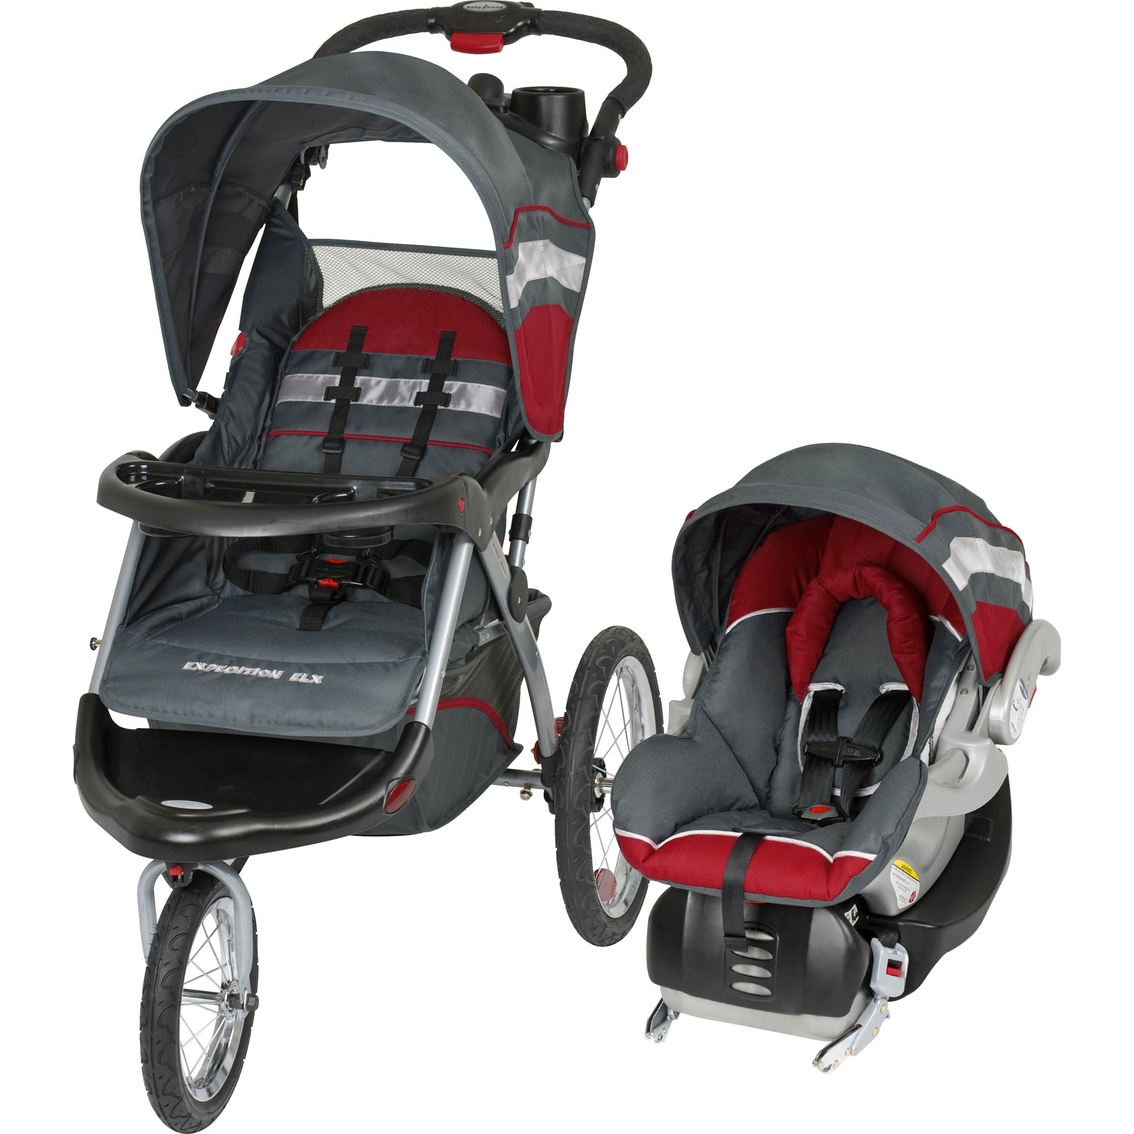 Baby Trend Expedition Elx Jogging Stroller And Car Seat 2 Pc. Travel ...